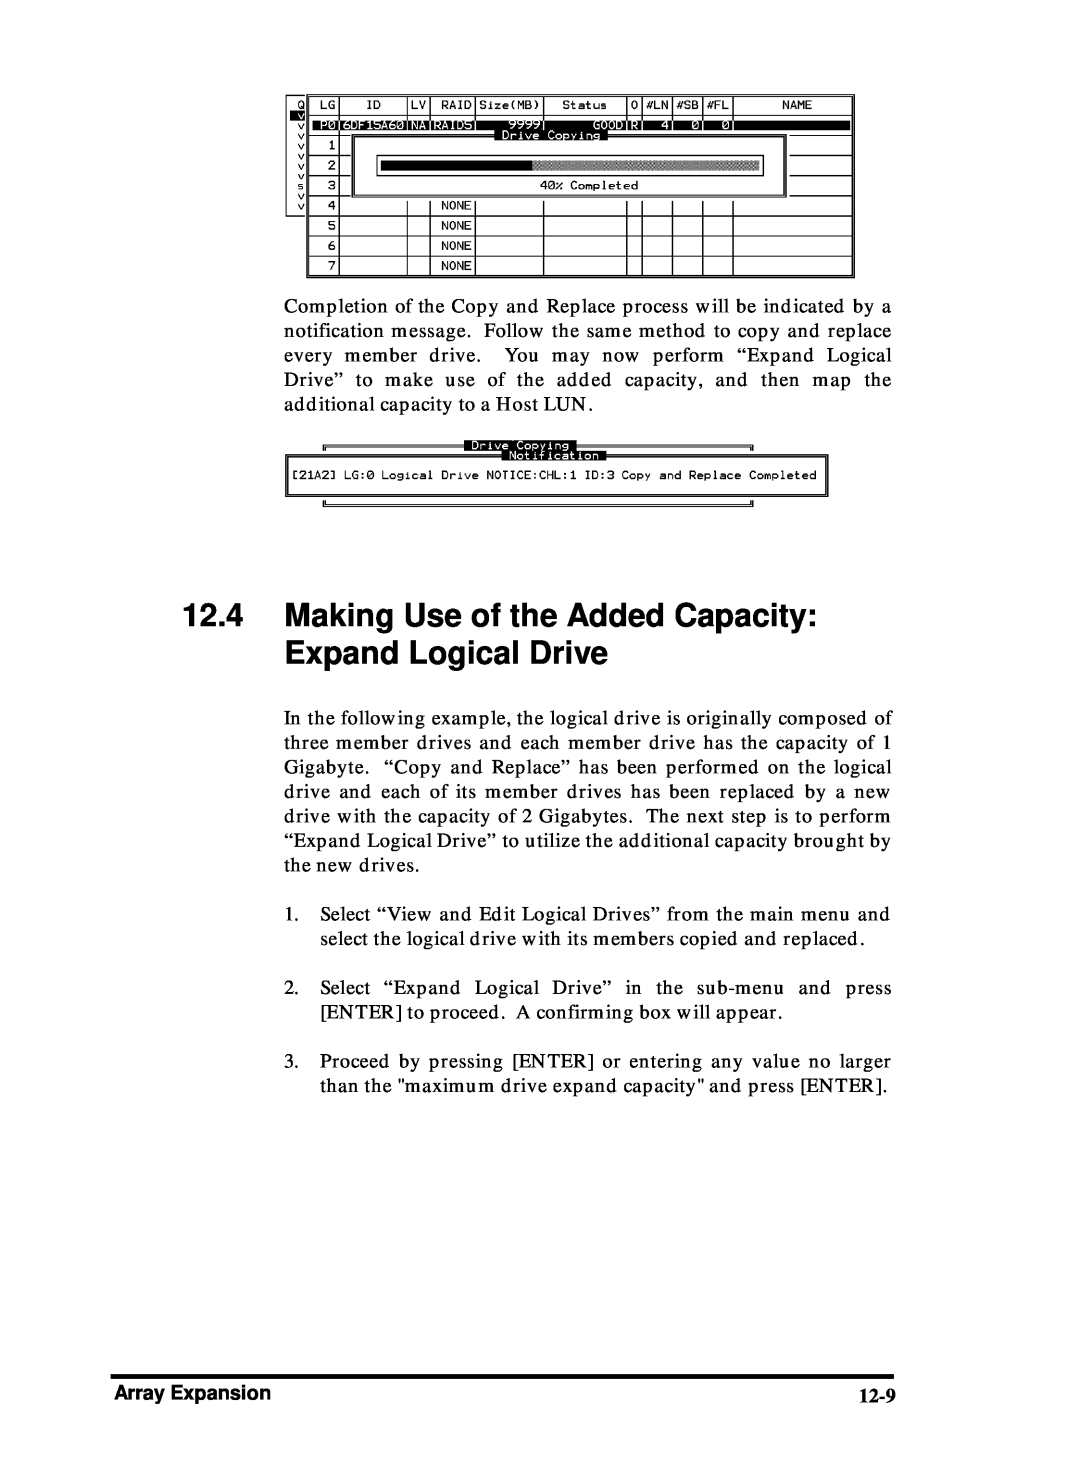 Compaq Infortrend manual Making Use of the Added Capacity Expand Logical Drive, 12-9 